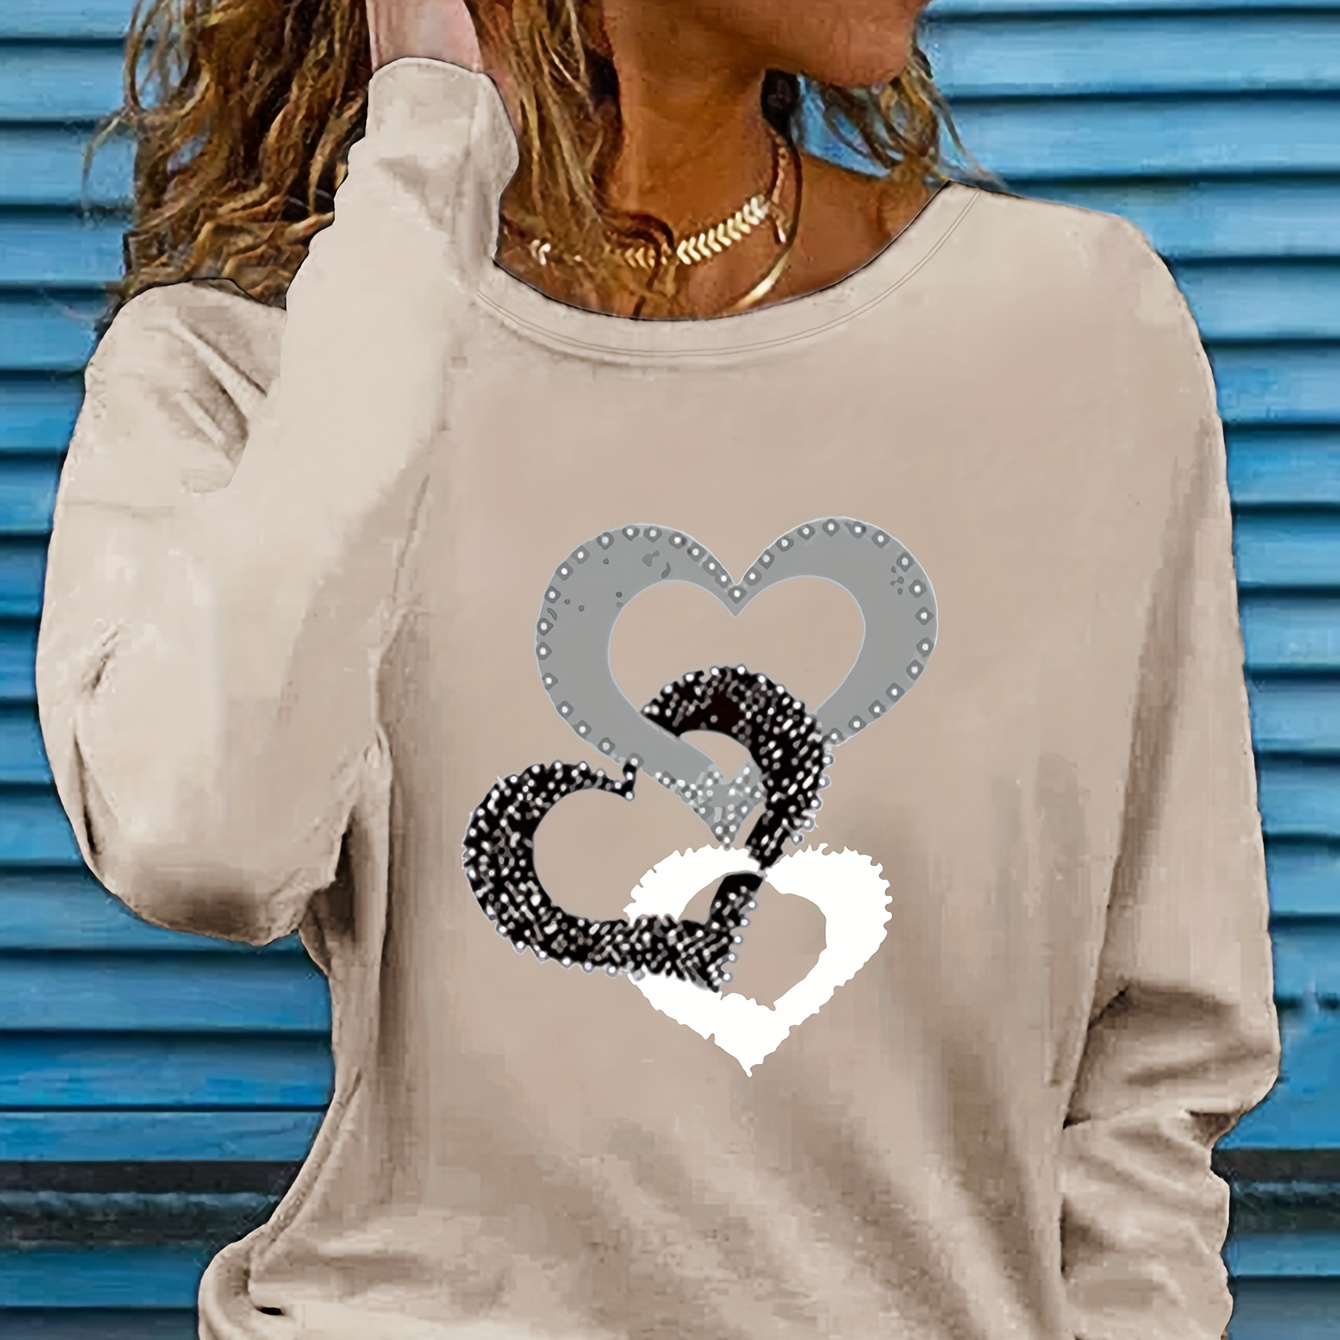 

Heart Print Crew Neck T-shirt, Casual Long Sleeve Top For Spring & Fall, Women's Clothing